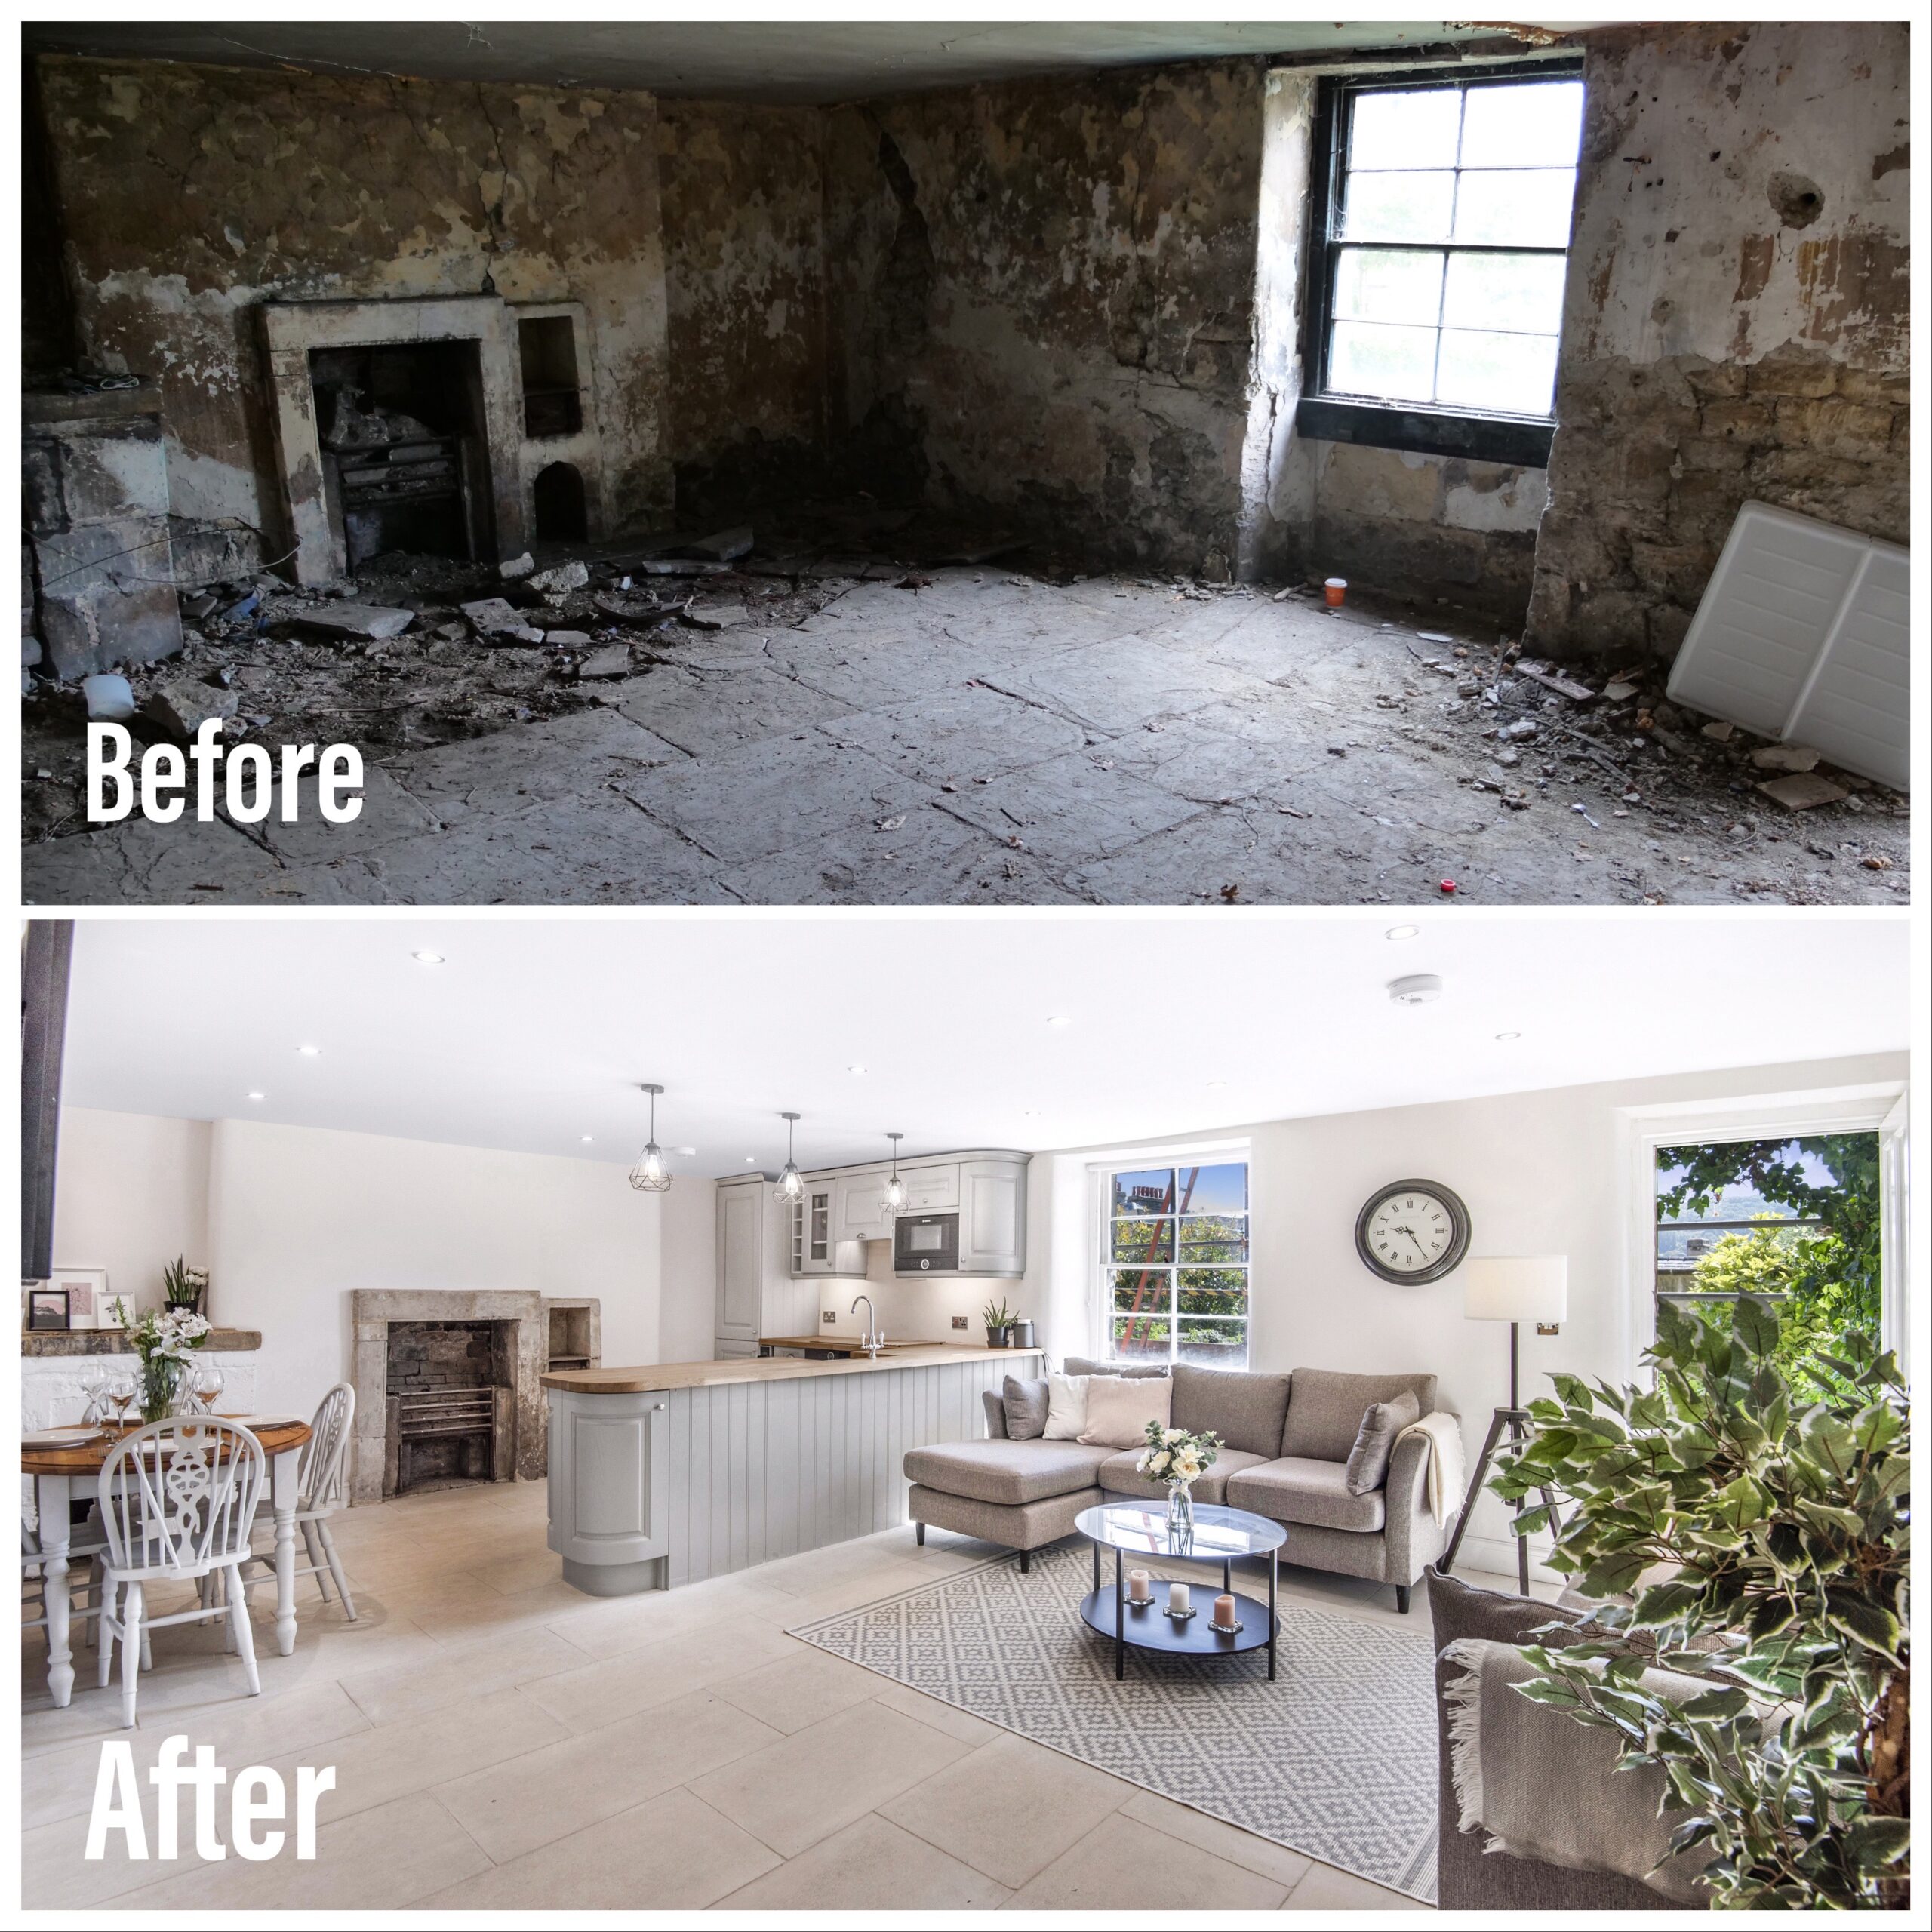 The kitchen and living area of this Grade I Listed bath property have been transformed